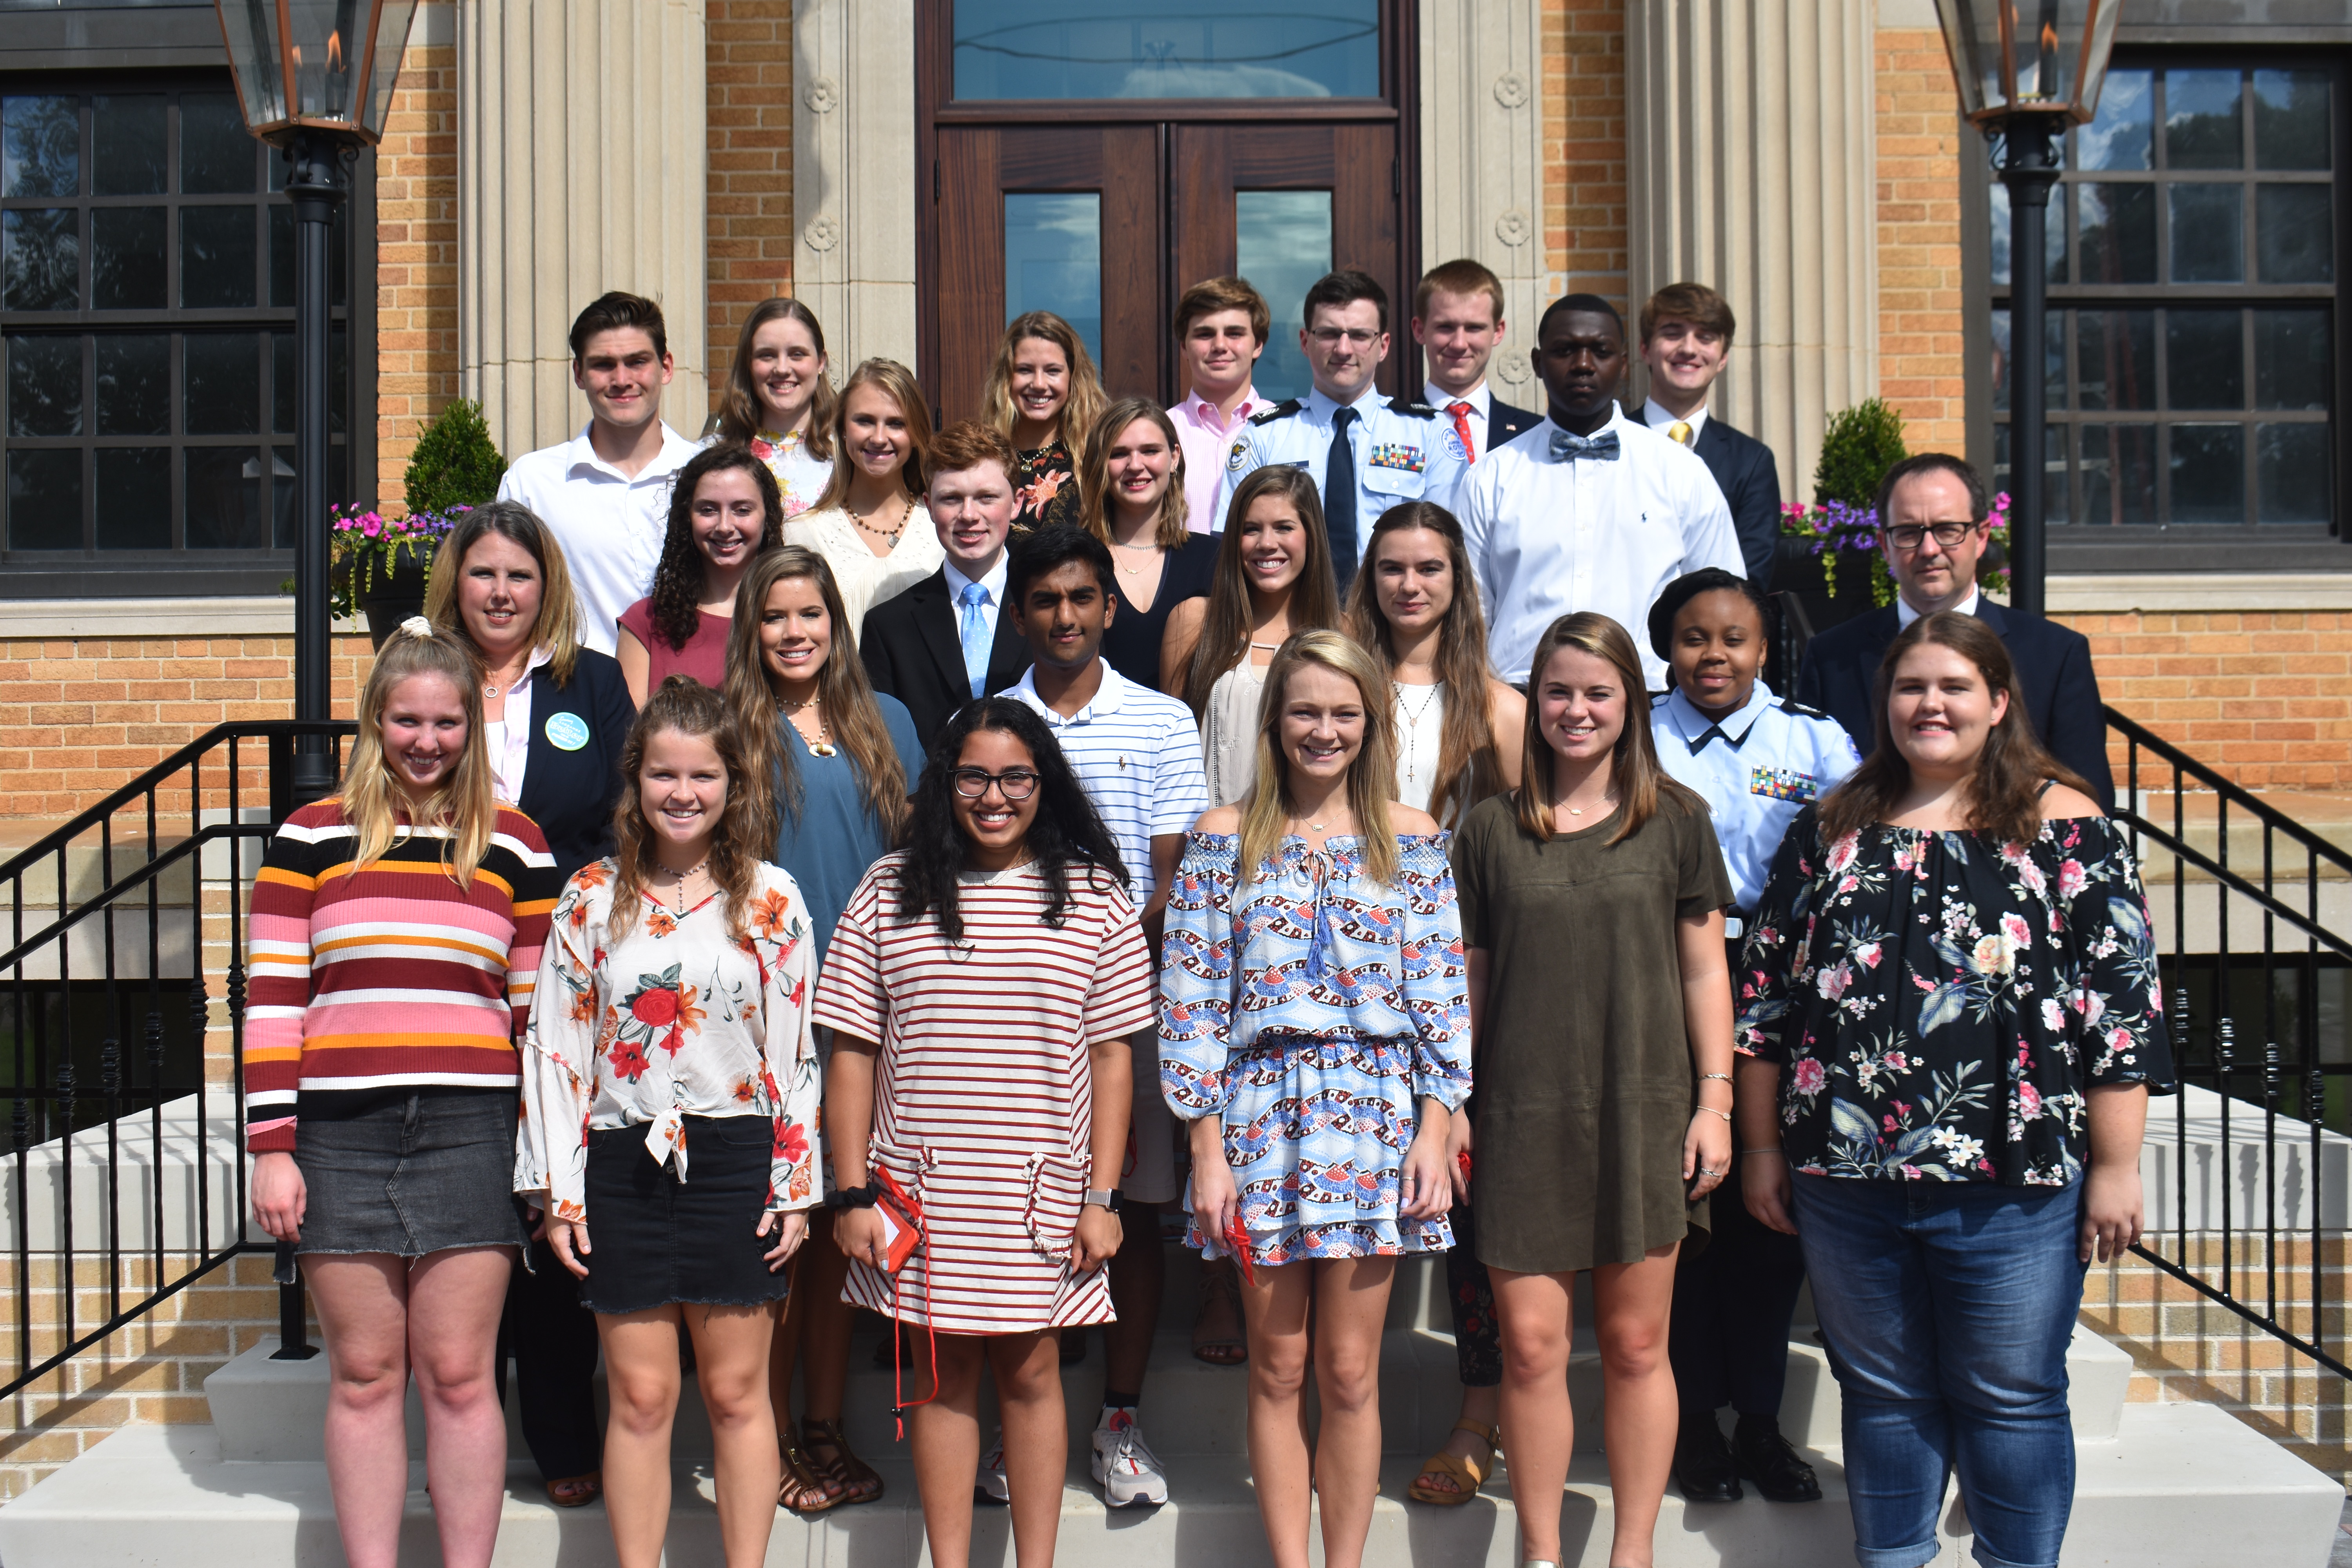 LaGrange Youth Council Group Photo, pictured outside on the steps of the City of LaGrange, Georgia - City Hall bldg